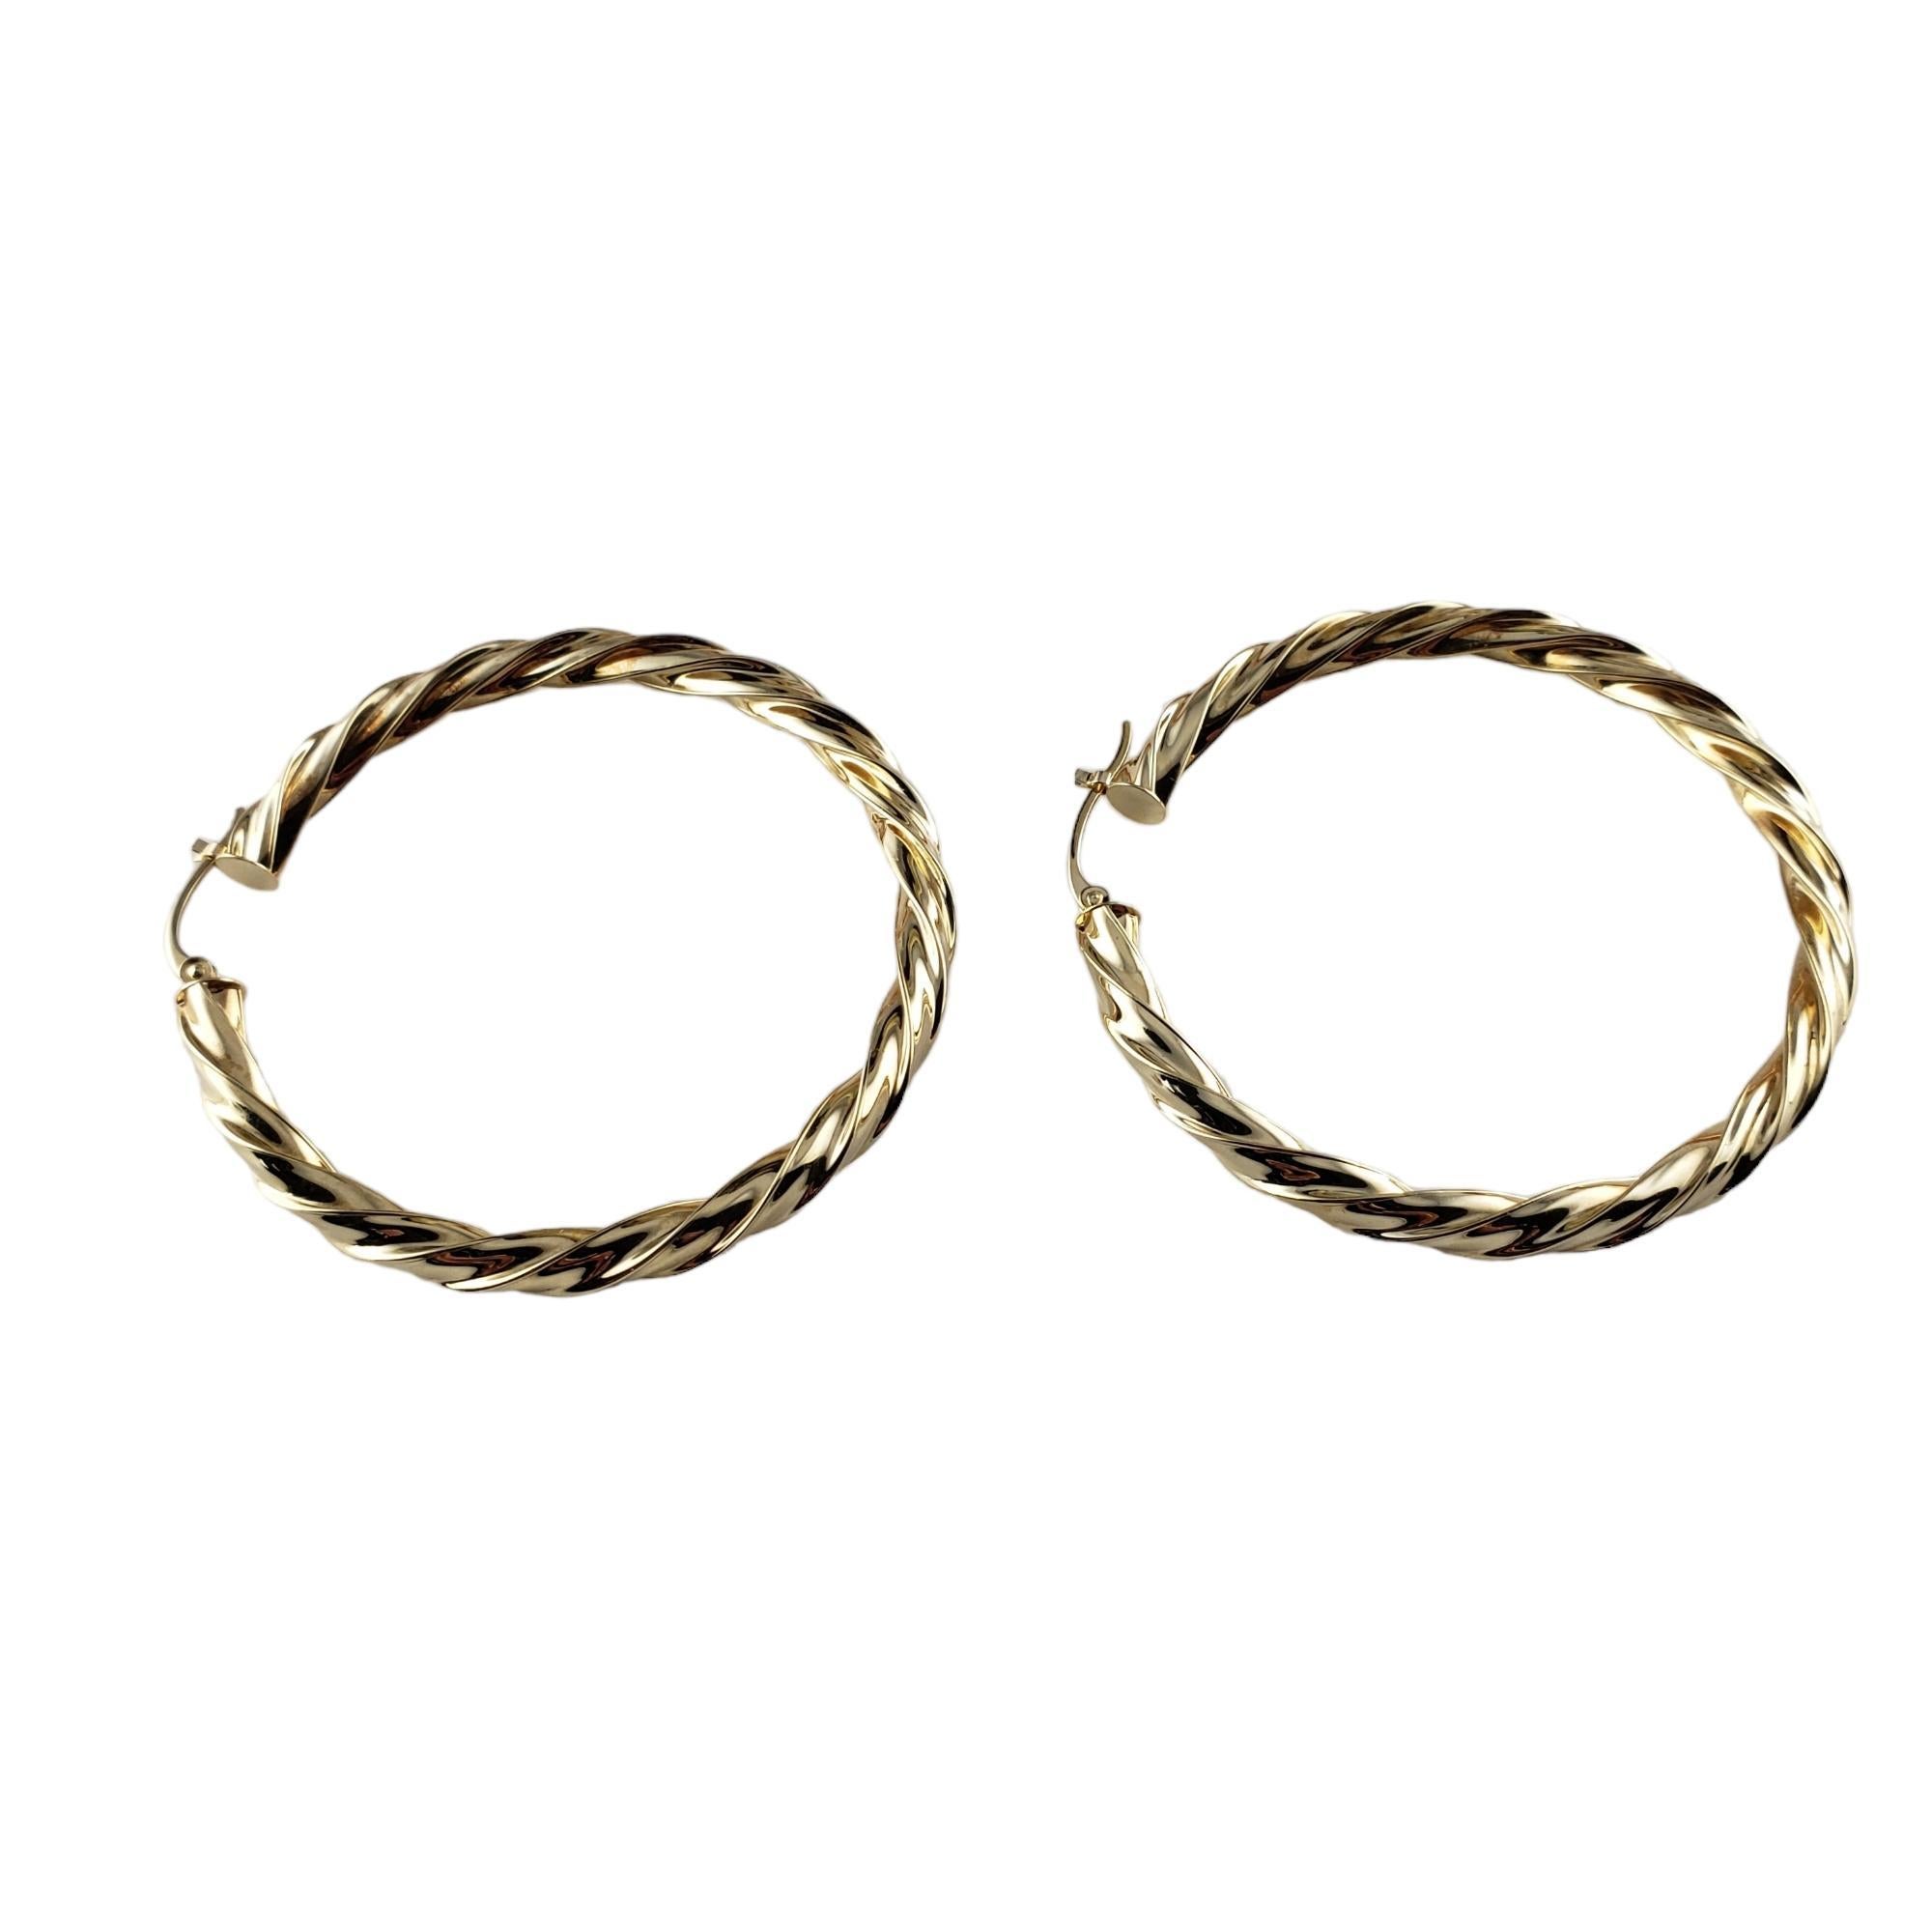 Vintage 14 Karat Yellow Gold Hoop Earrings-

These elegant hoop earrings are crafted in beautifully detailed 14K yellow gold.

Size:  45.6 mm 

Stamped: 14K

Weight: 3.8 gr./ 2.4 dwt.

Very good condition, professionally polished.

Will come